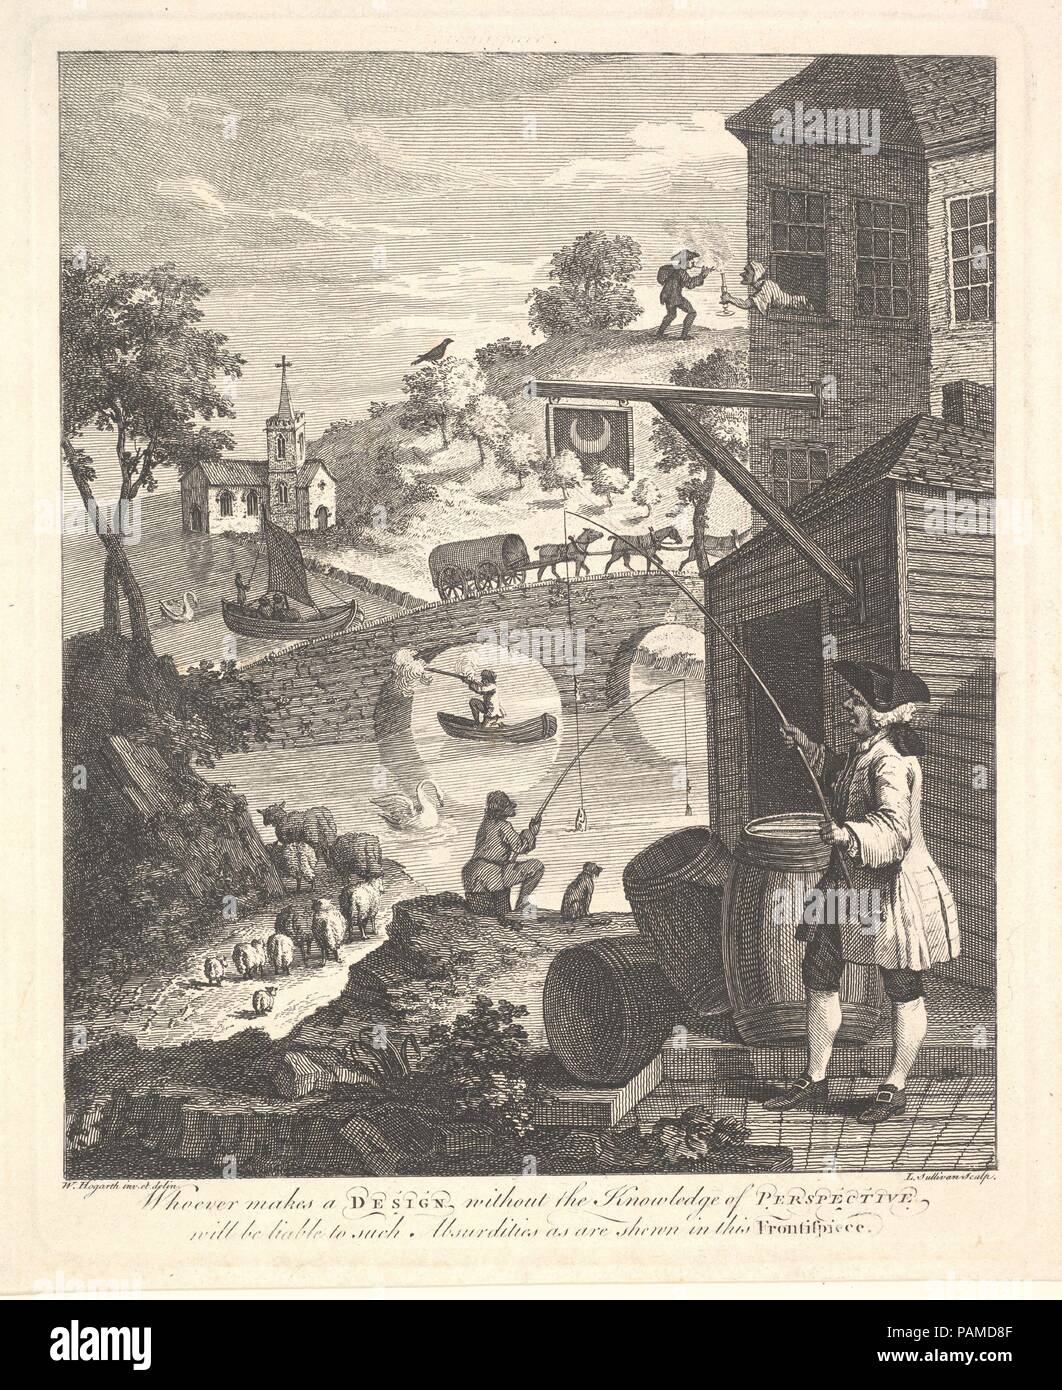 Satire on False Perspective: Frontispiece to 'Kirby's Perspective'. Artist: After William Hogarth (British, London 1697-1764 London). Dimensions: image: 8 1/8 x 6 13/16 in. (20.6 x 17.3 cm)  plate: 8 7/8 x 7 1/4 in. (22.6 x 18.4 cm)  sheet: 9 3/8 x 8 in. (23.8 x 20.3 cm). Engraver: Luke Sullivan (Irish, 1705-1771 London). Subject of book: Related to book by Joshua Kirby (British, Parham, Suffolk 1716-1774 Kew Green, Surrey). Date: February 1754. Museum: Metropolitan Museum of Art, New York, USA. Stock Photo